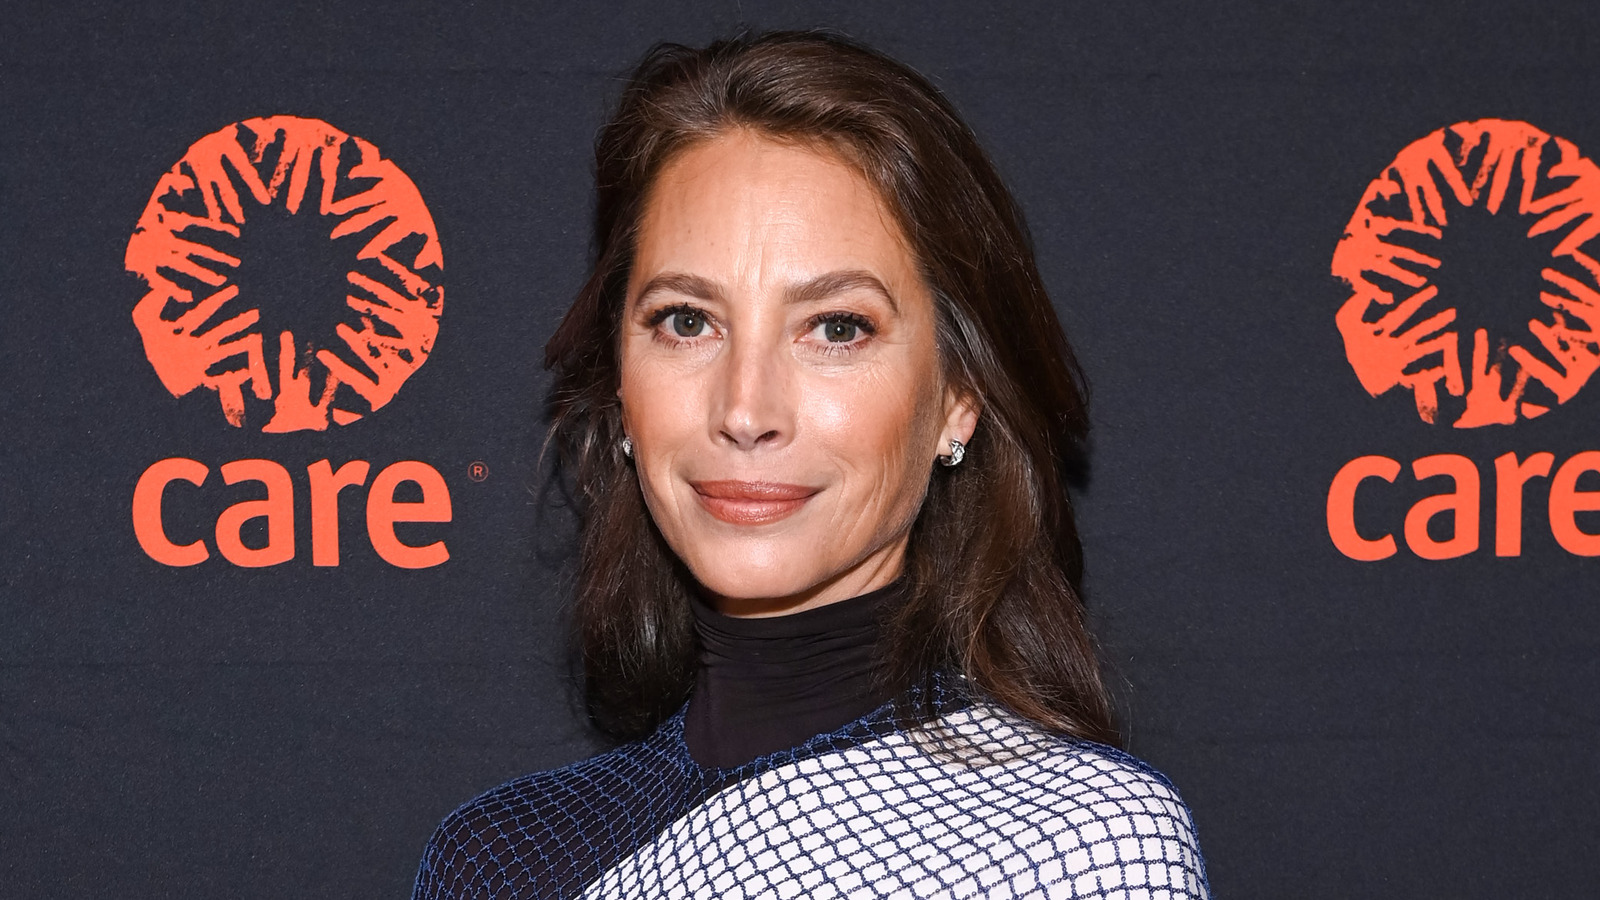 Christy Turlington's Daughter Grace Burns Is Practically Her Twin